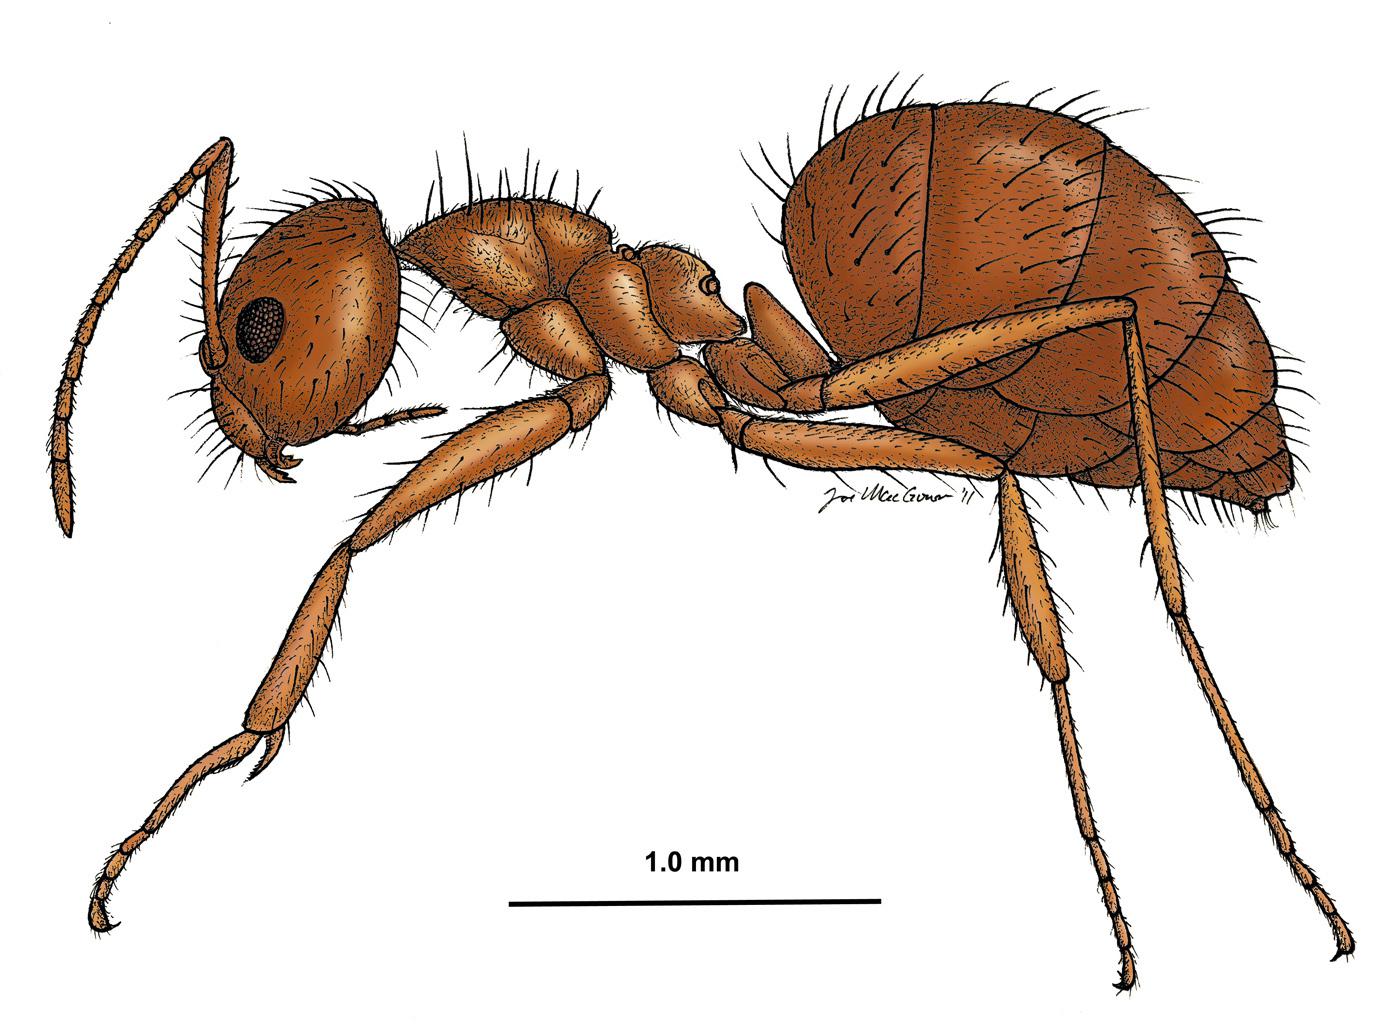 This scientific illustration depicts an adult crazy hairy ant, Nylanderia pubens, which was first detected in Mississippi in 2009. (Illustration by Mississippi Entomological Museum/Joe MacGown)